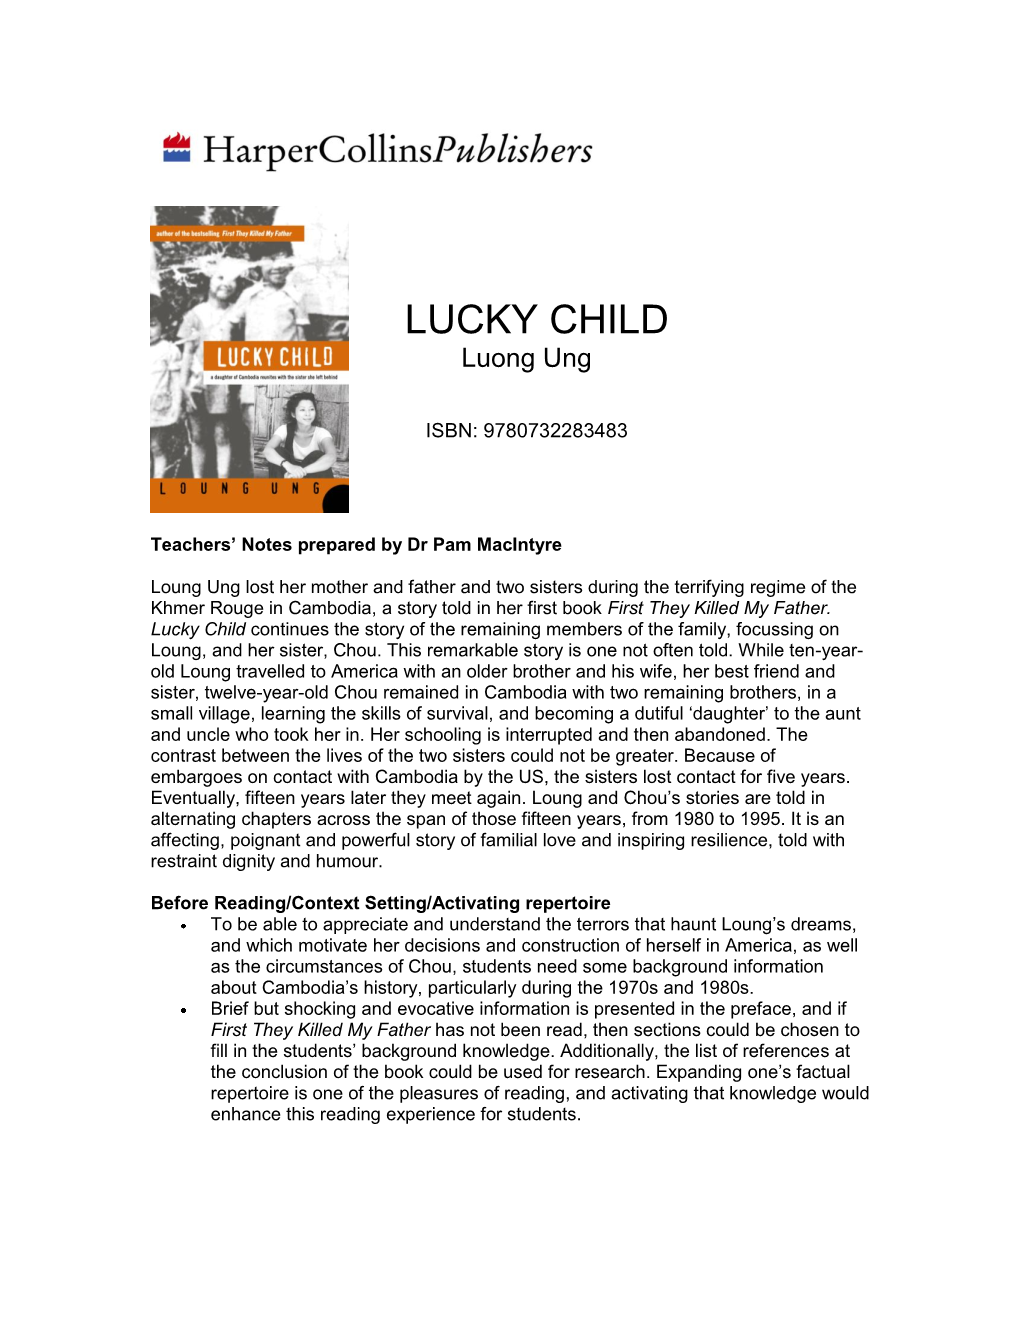 Teachers' Notes for Lucky Child by Luong